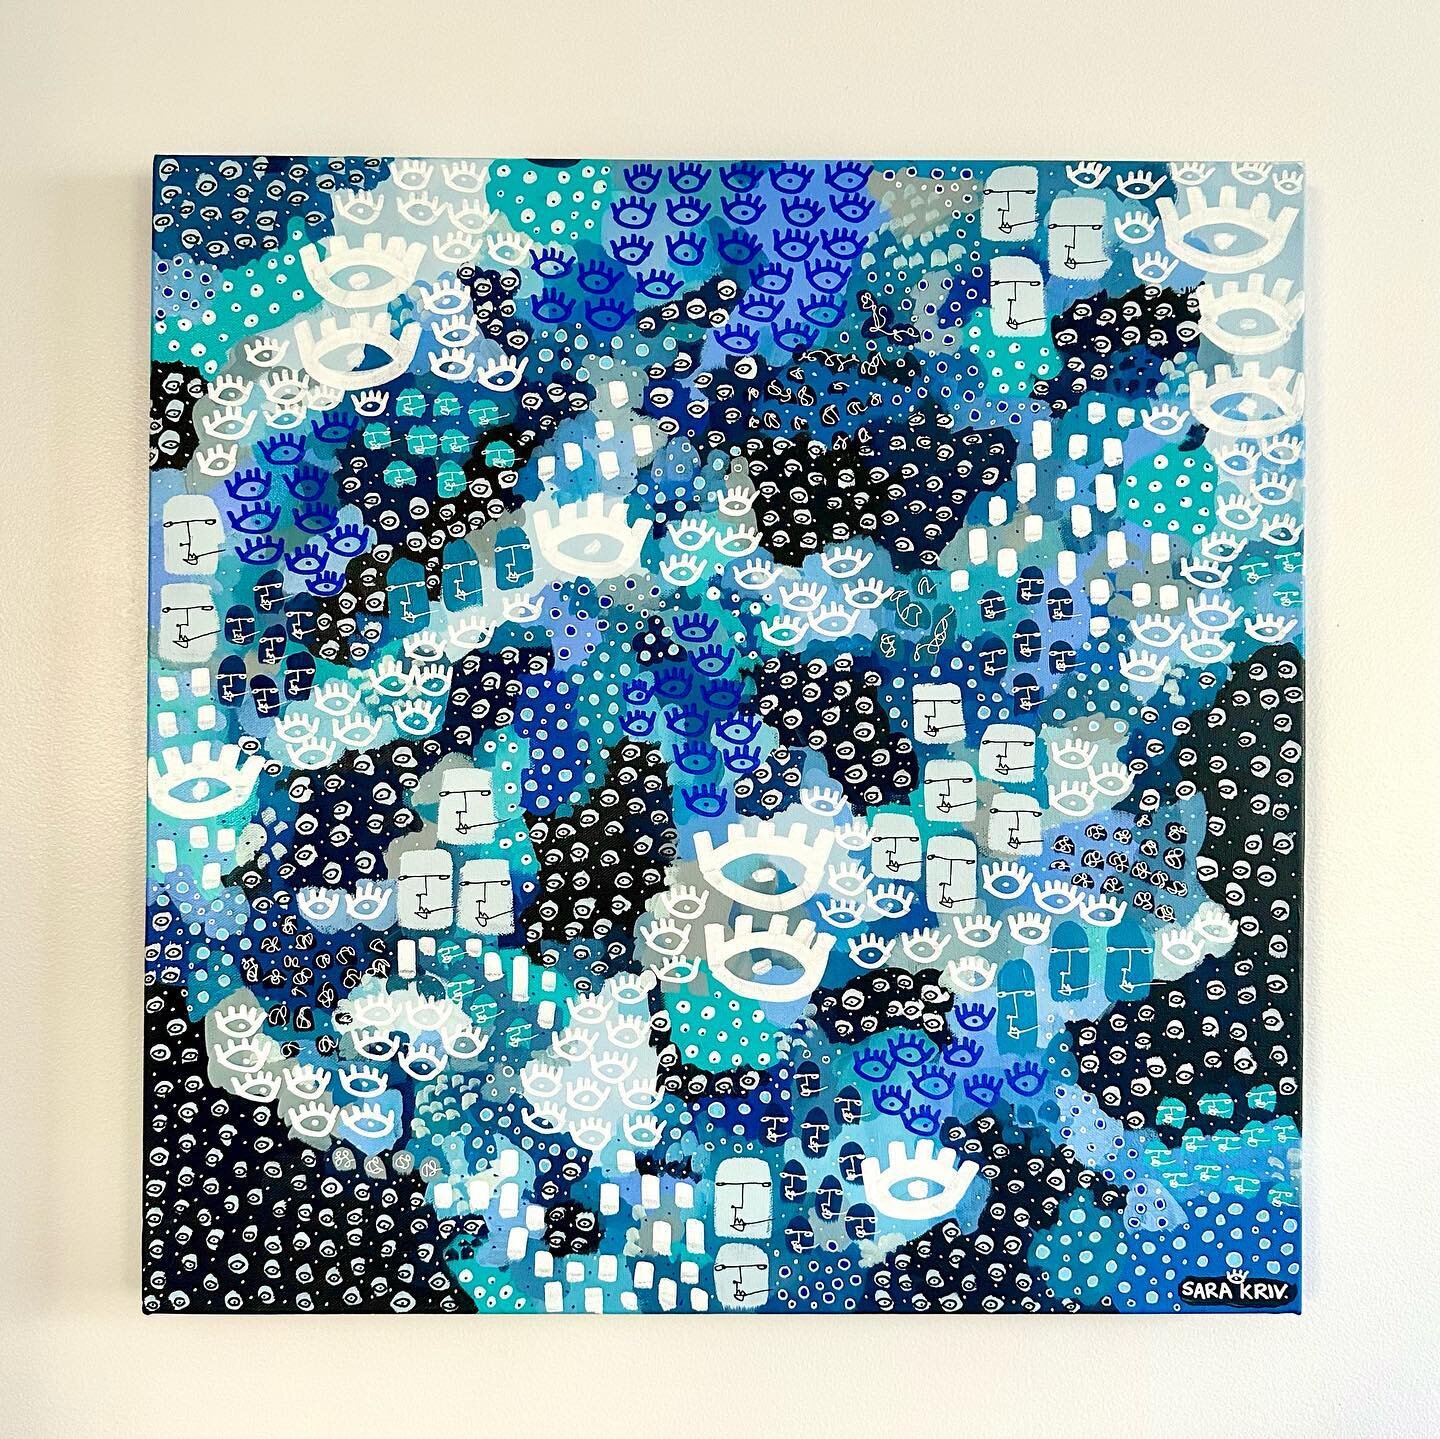 NEW PAINTING 💙💙💙
&ldquo;Ebb &amp; Flow&rdquo; 
24x24&rdquo; 

This painting will be for sale at the @columbusartsfest ✨ 
.
.
.
.
#art #614artists #columbus #artistofcolumbus #painting #abstract #abstractart #abstractpainting #wip #acrylicpainting 